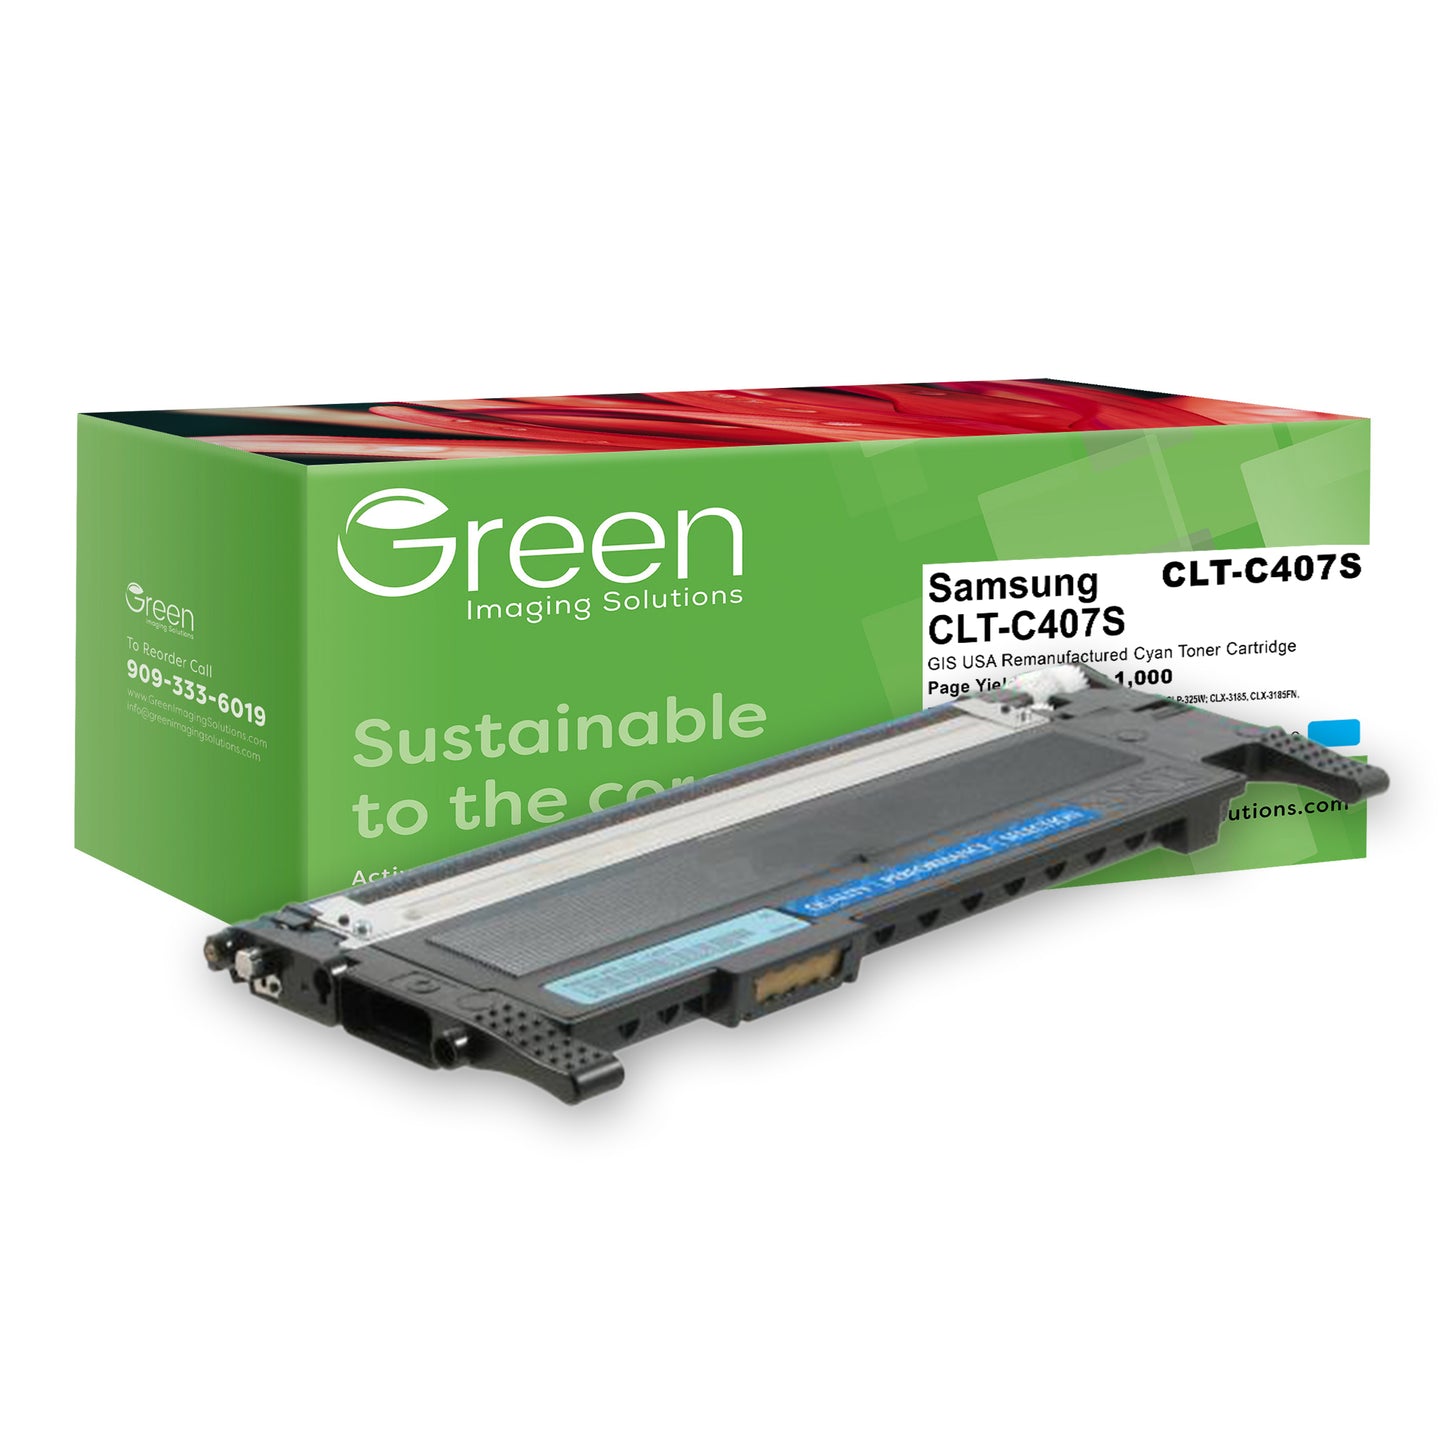 Green Imaging Solutions USA Remanufactured Cyan Toner Cartridge for Samsung CLT-C407S